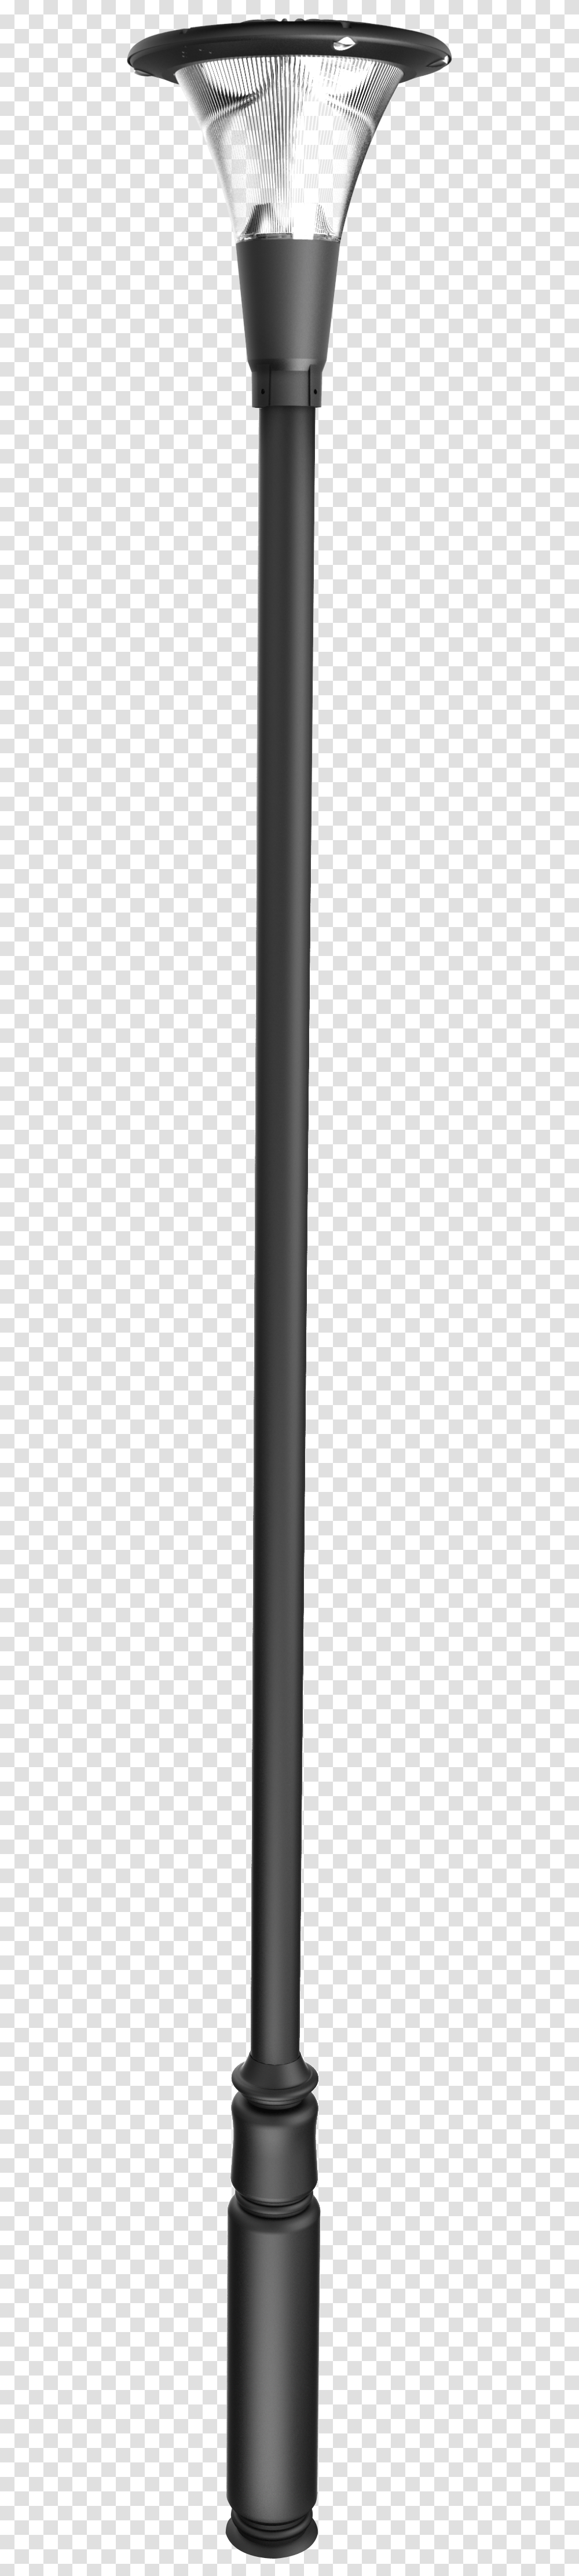 Post Top Lights With Pole, Brush, Tool, Weapon, Stick Transparent Png